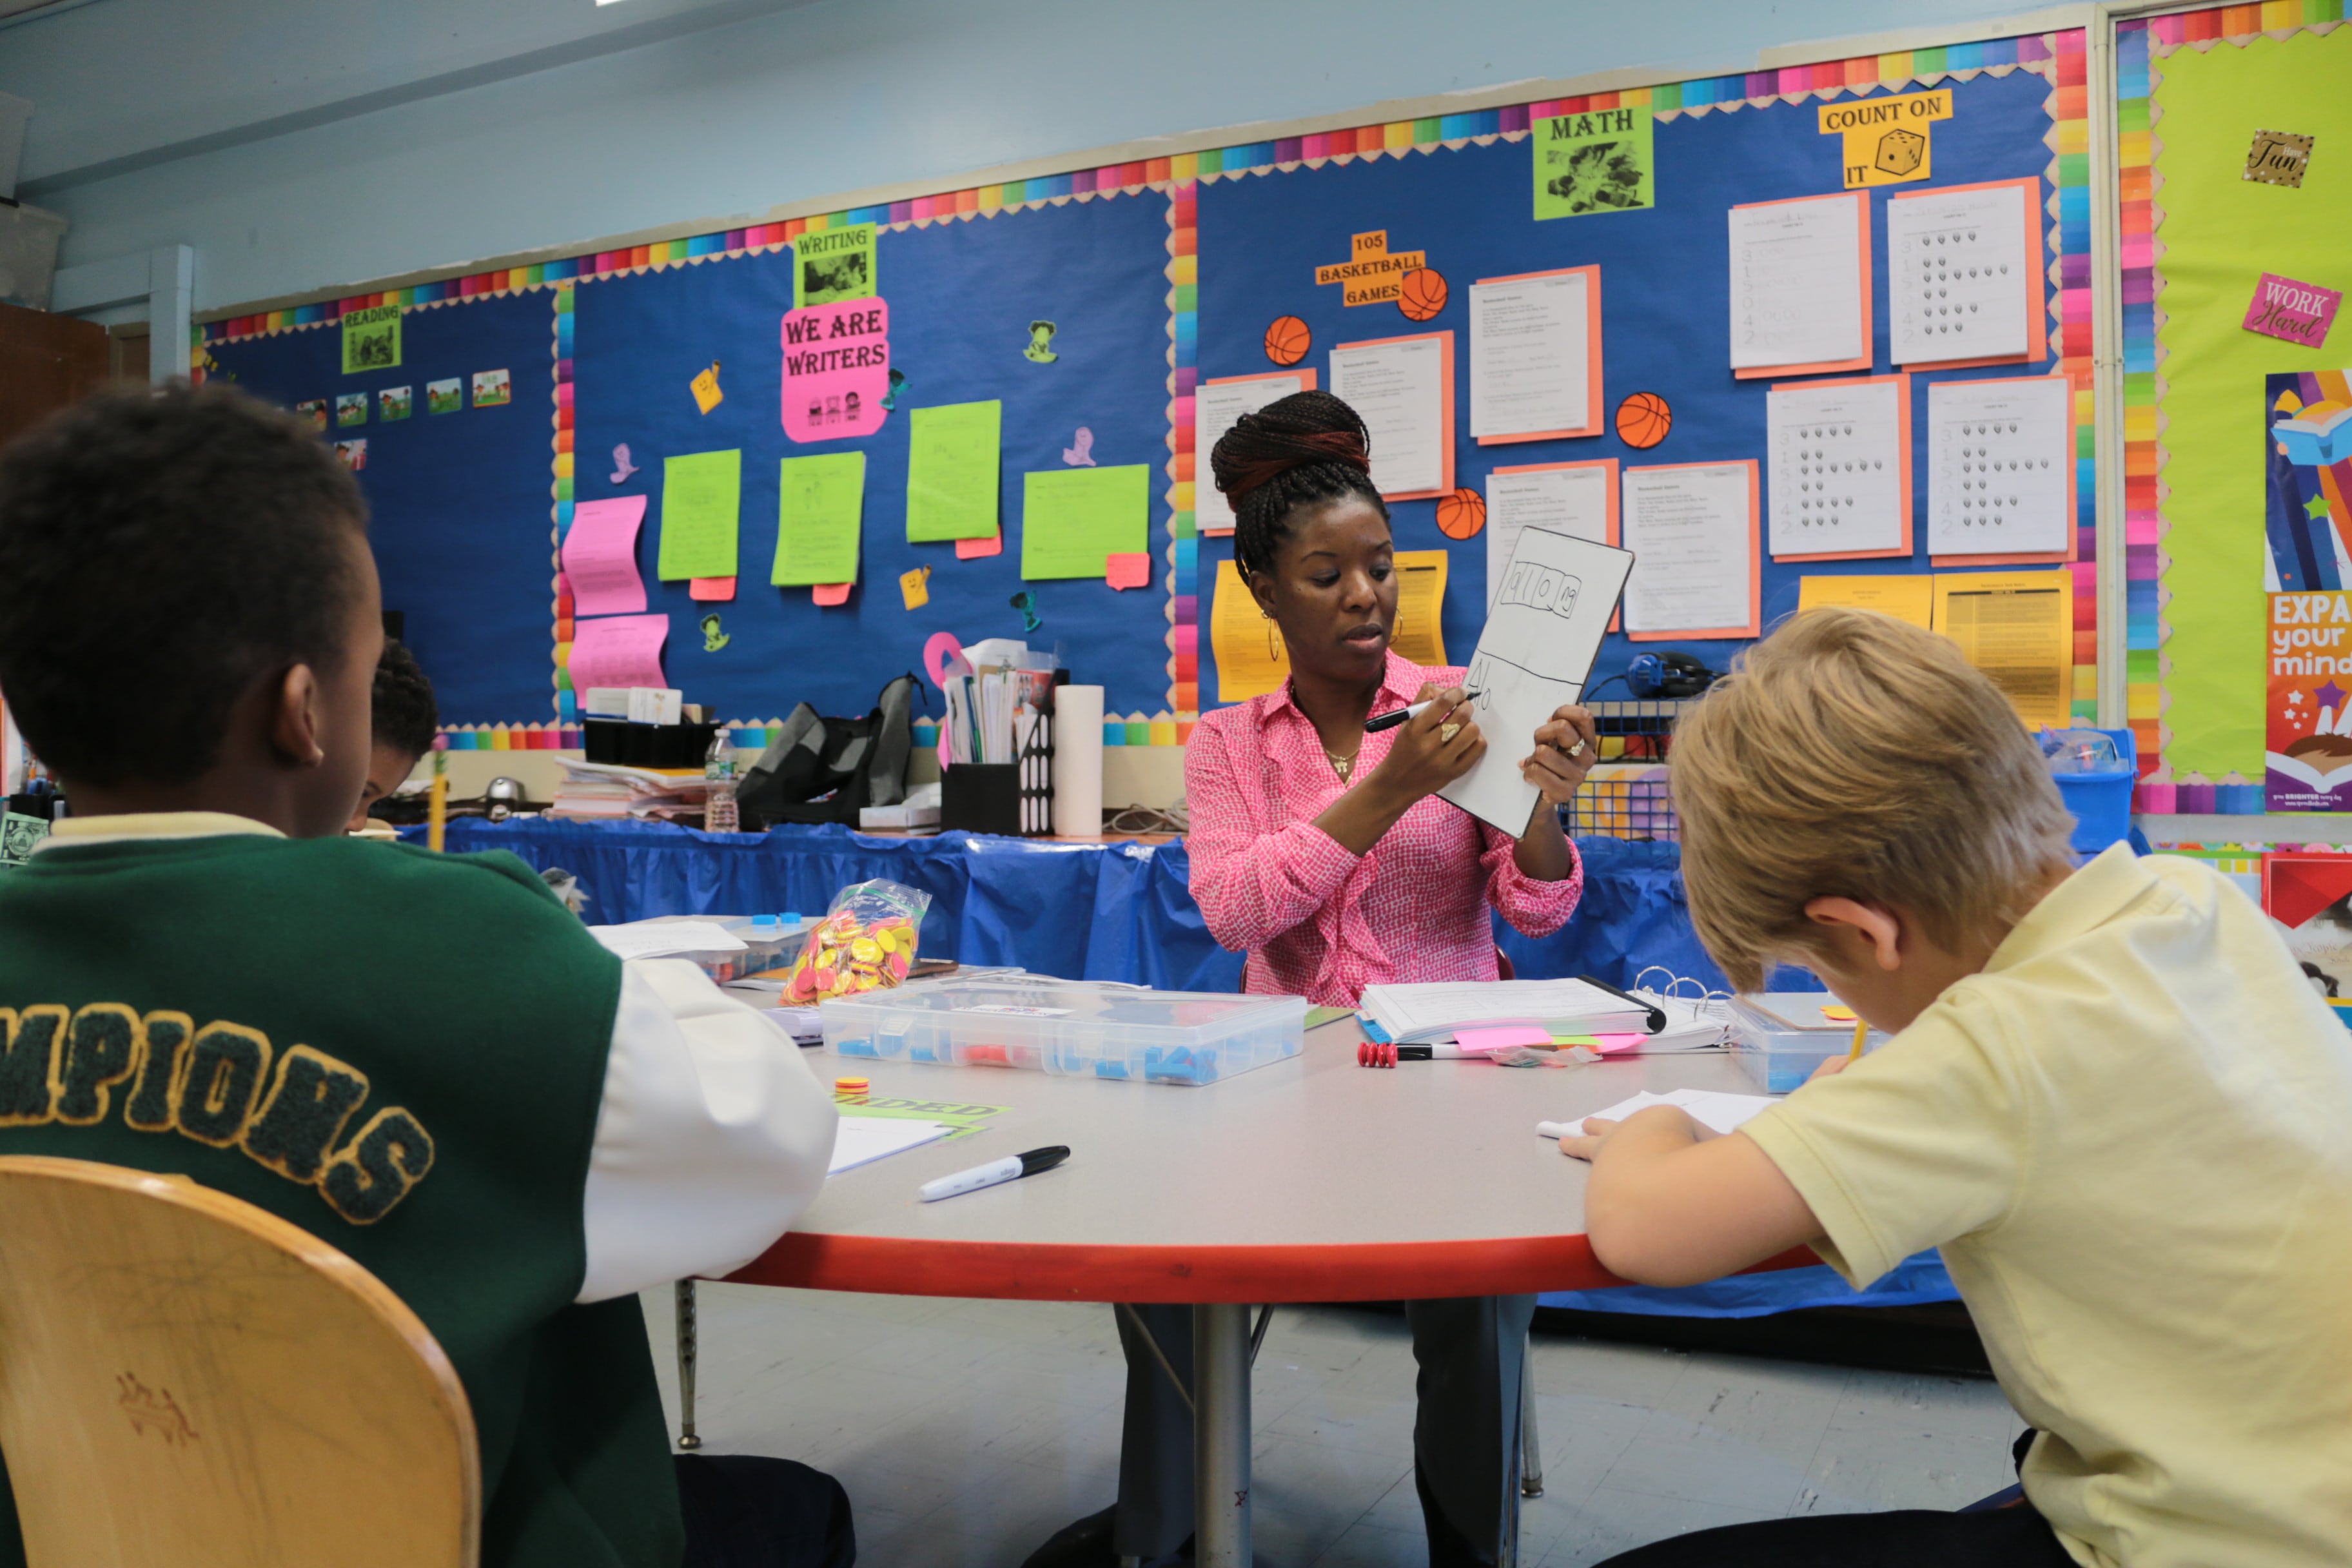 Two students work at a table, facing away from the camera, while a teacher in a pink shirt on the other side of the table writes on a small hand-held white board.